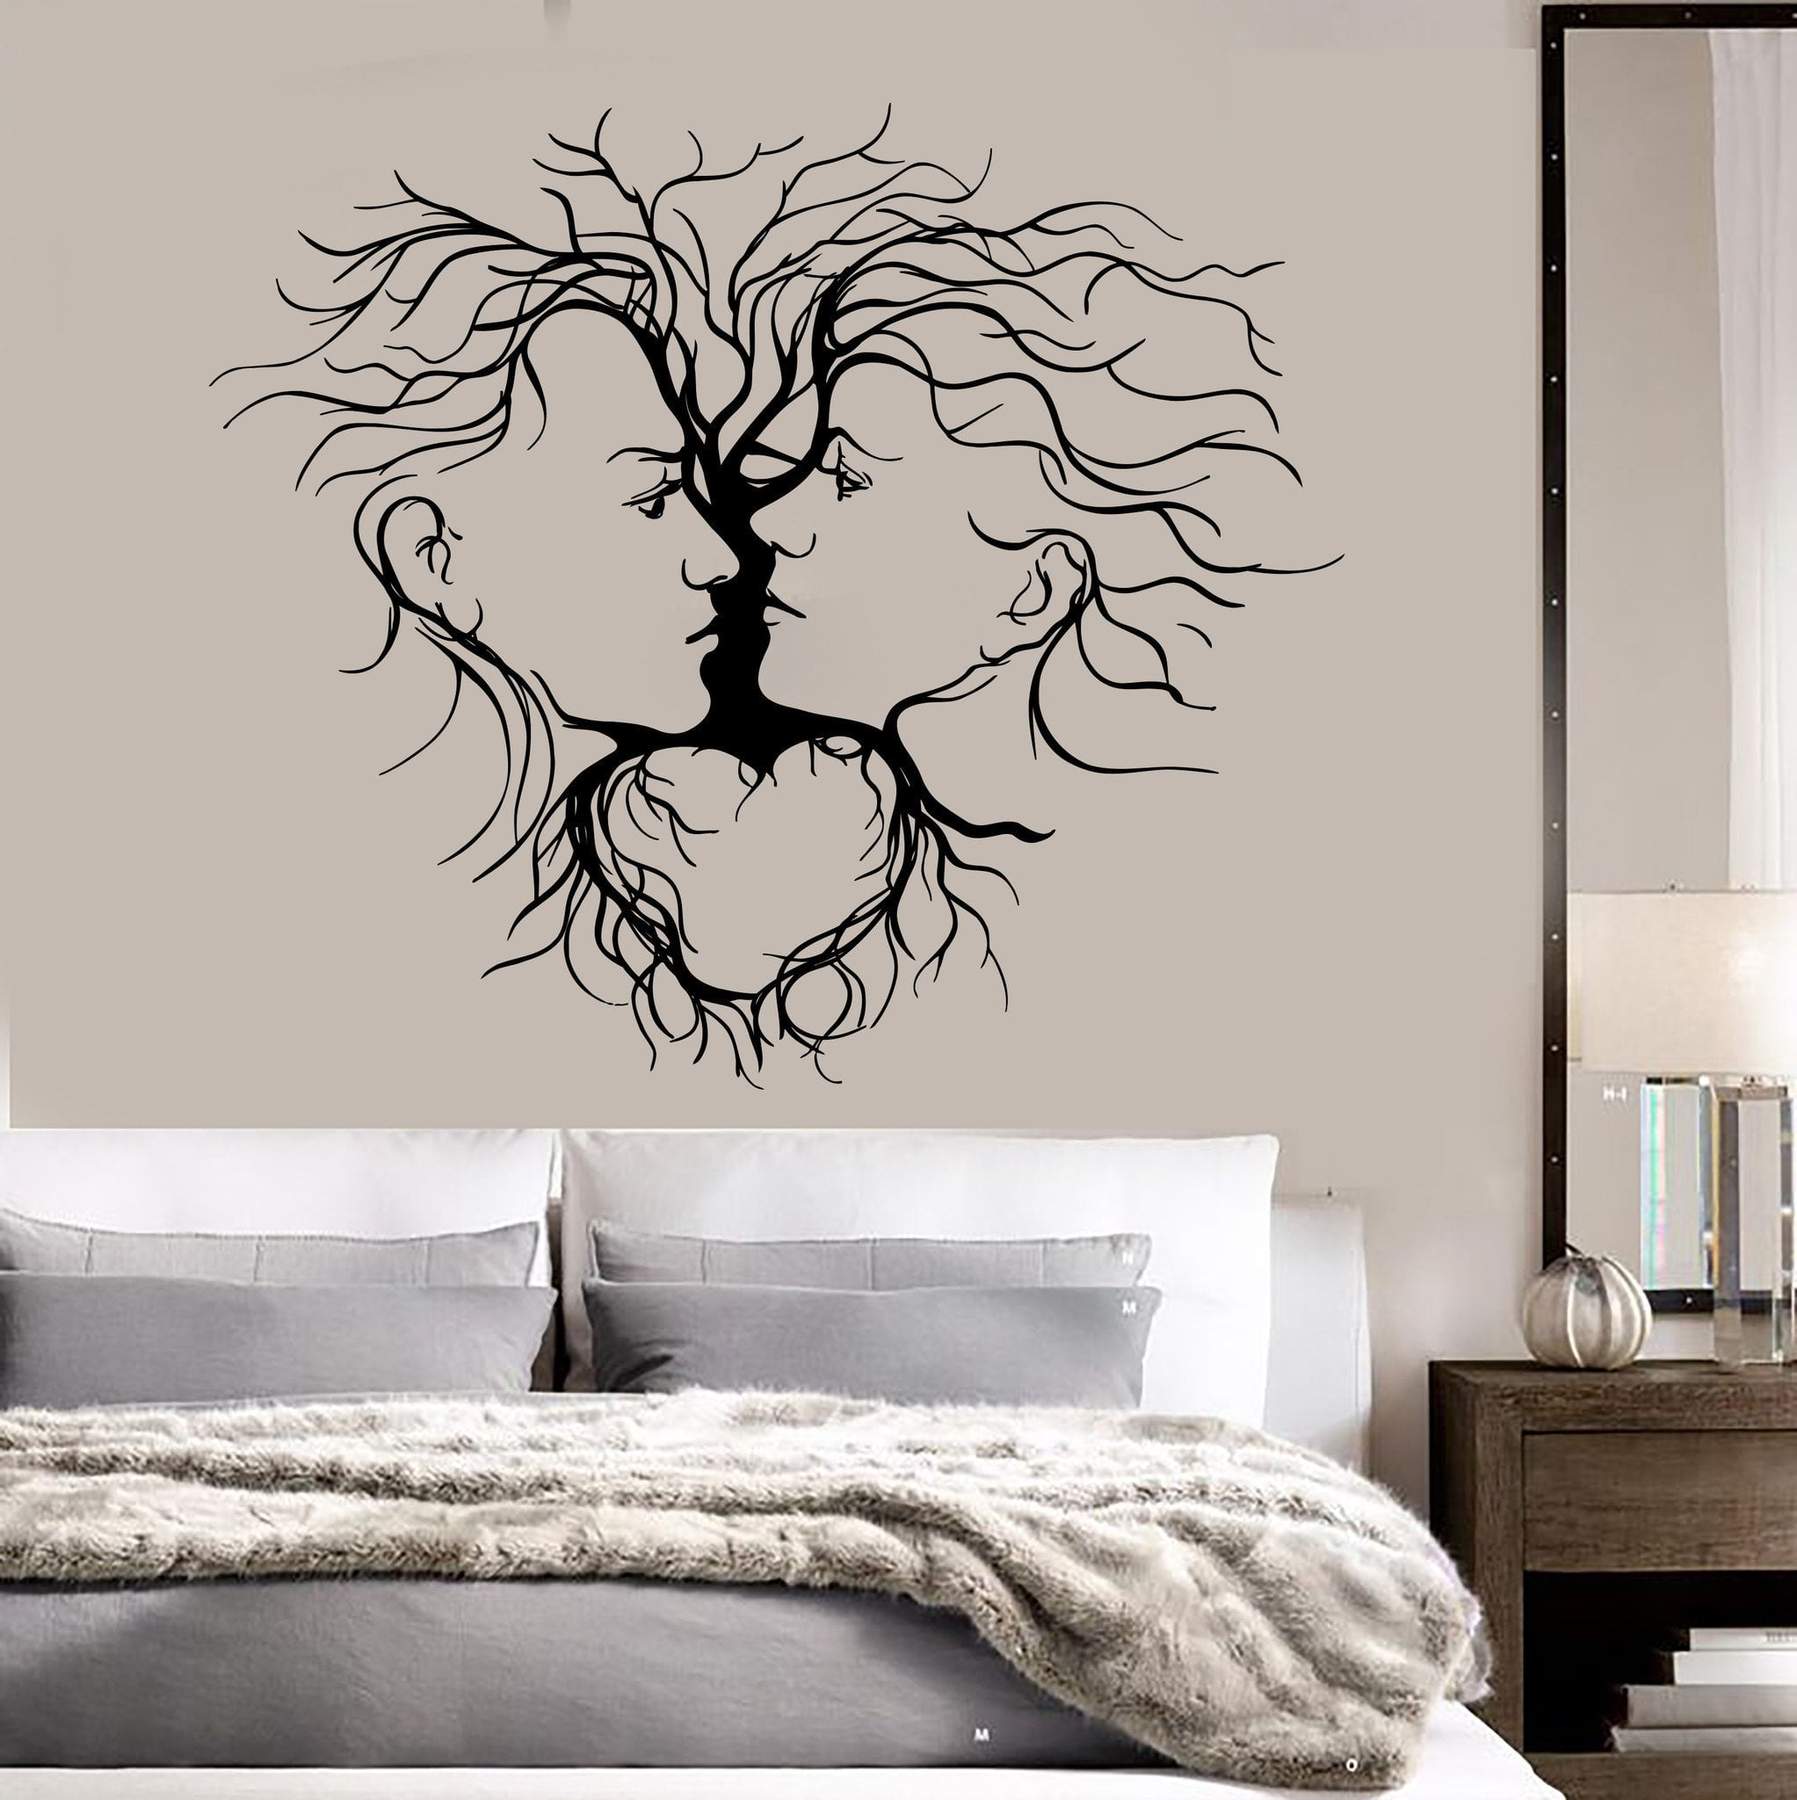 Laser Cut Loving Couple Abstract Tree Wall Decor DXF File